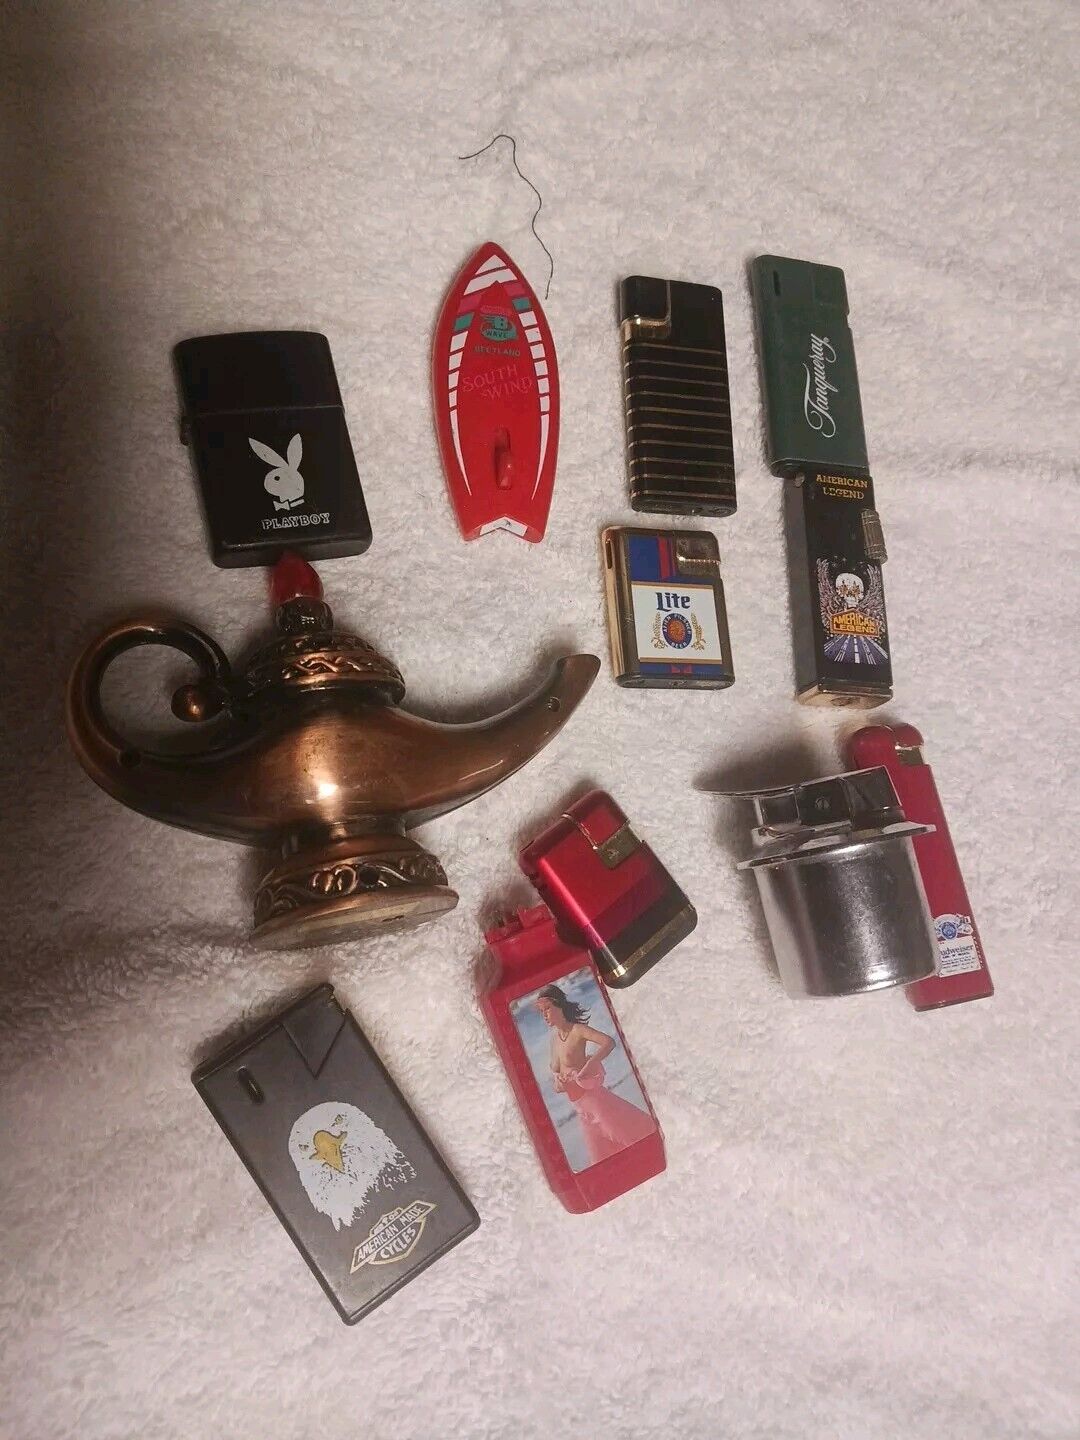 LOT OF 12 ASSORTED VINTAGE CIGARETTE LIGHTERS   collect / fix  / display  